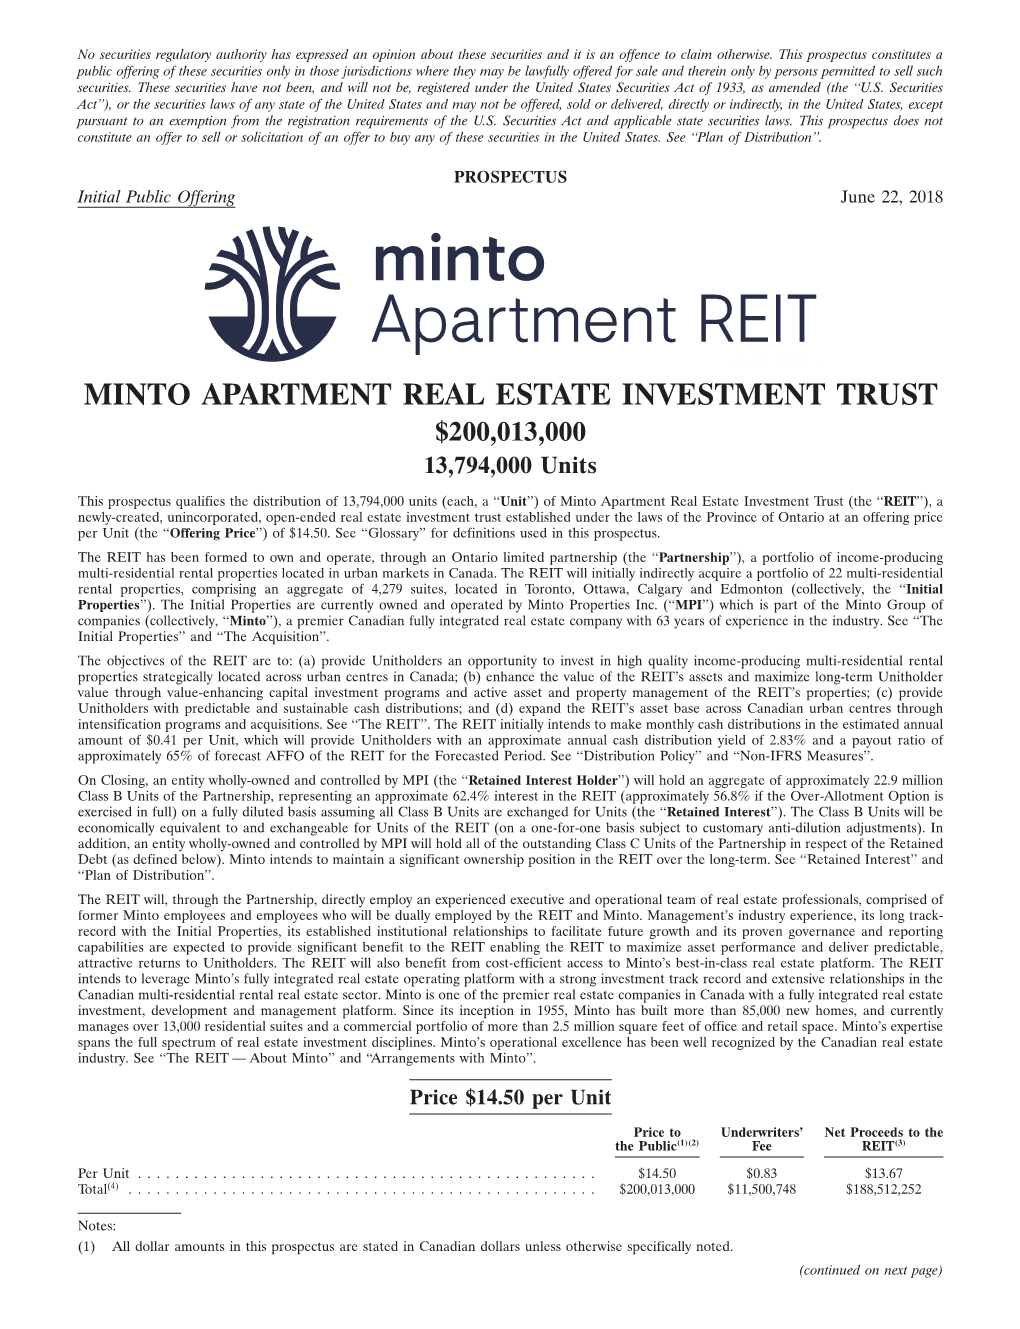 MINTO APARTMENT REAL ESTATE INVESTMENT TRUST $200,013,000 13,794,000 Units